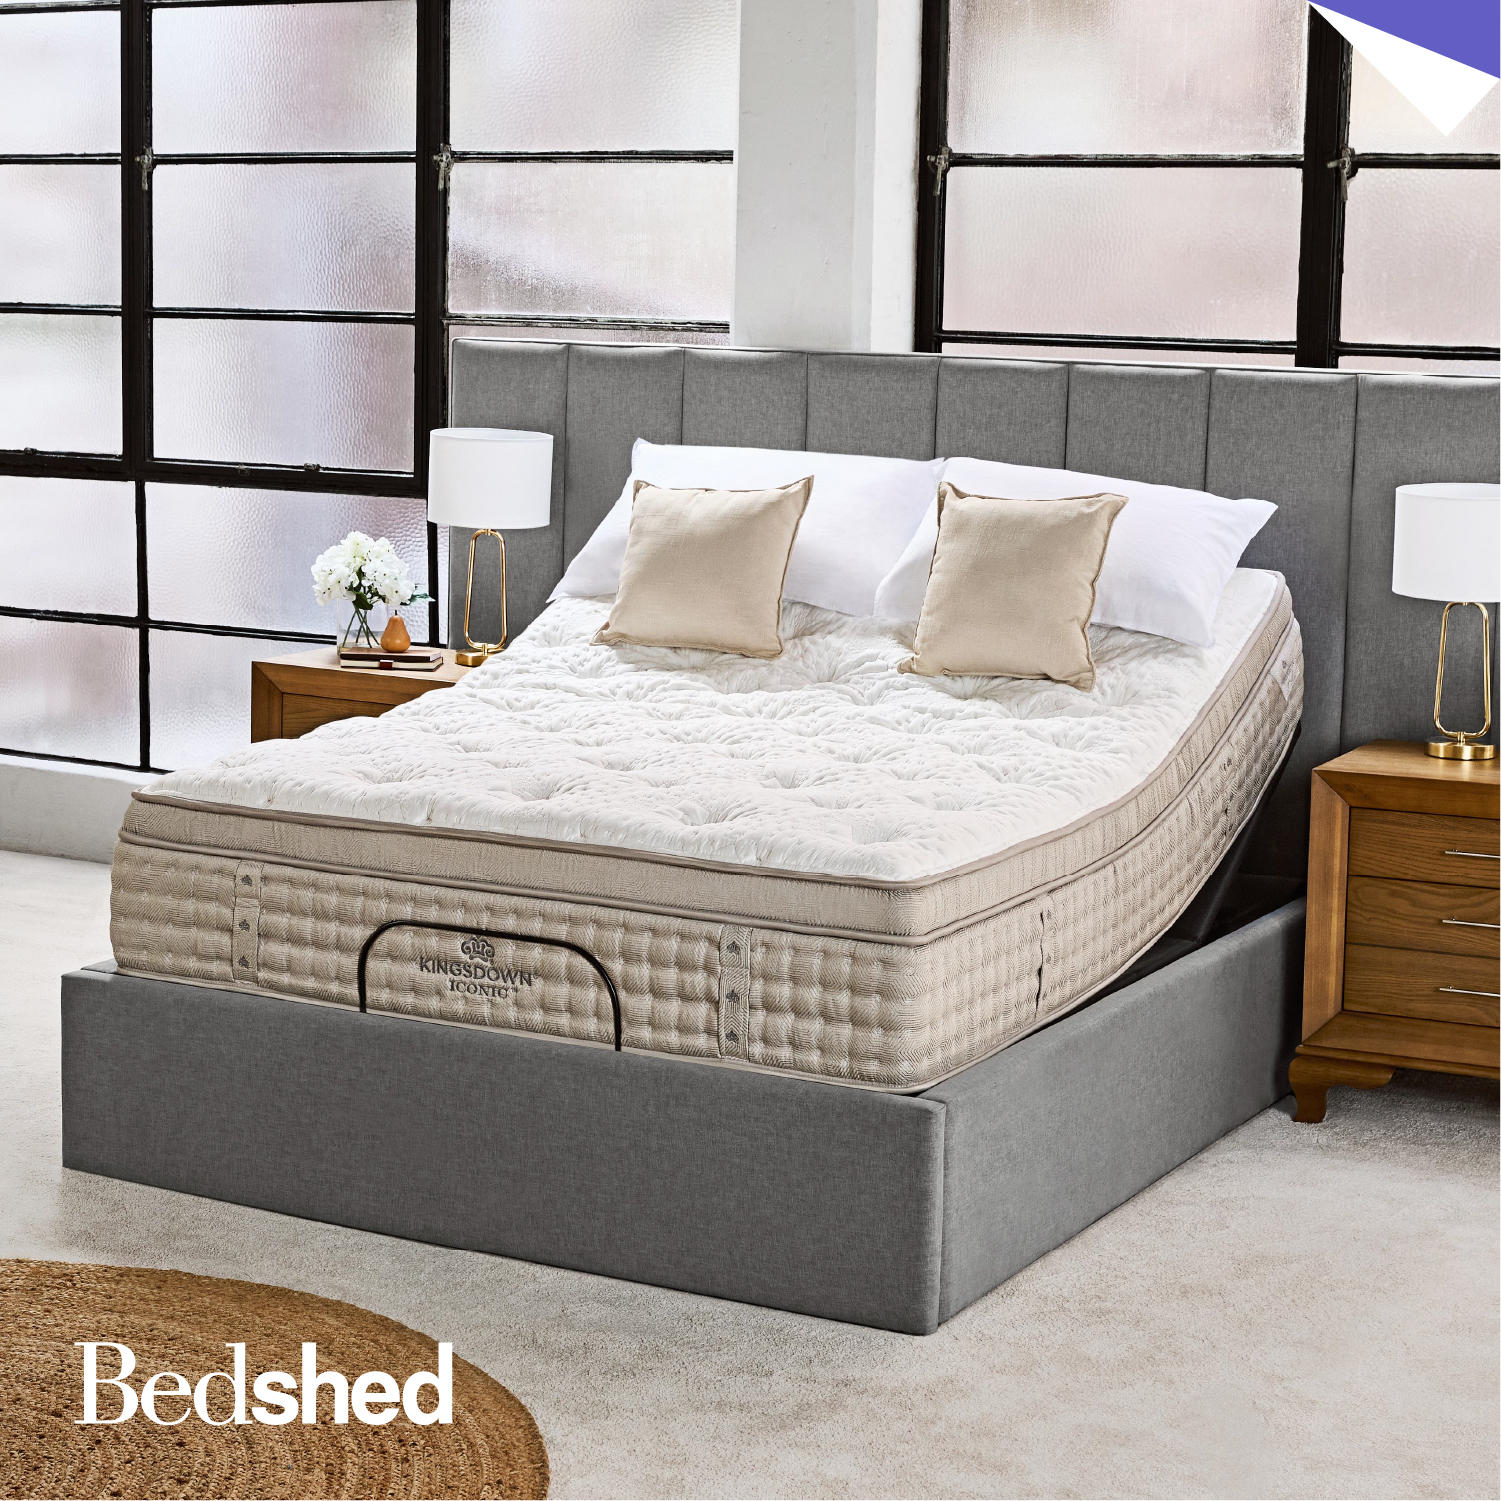 Kingsdown Iconic Collection Mattress Bedshed Busselton Busselton (08) 9752 4299